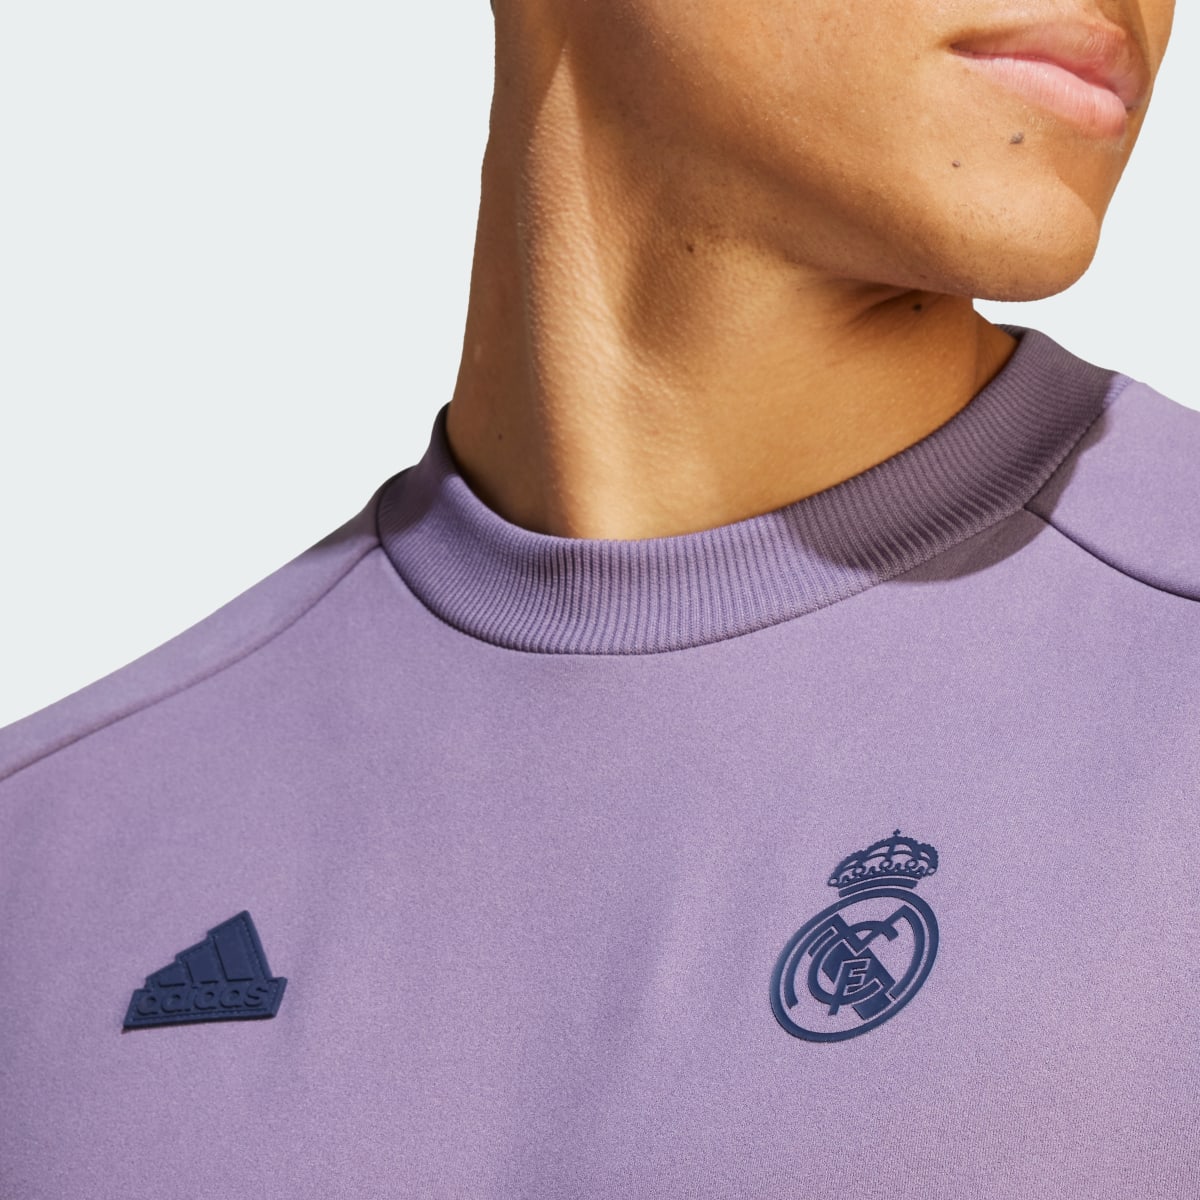 Adidas Sweat-shirt Real Madrid Designed for Gameday. 6